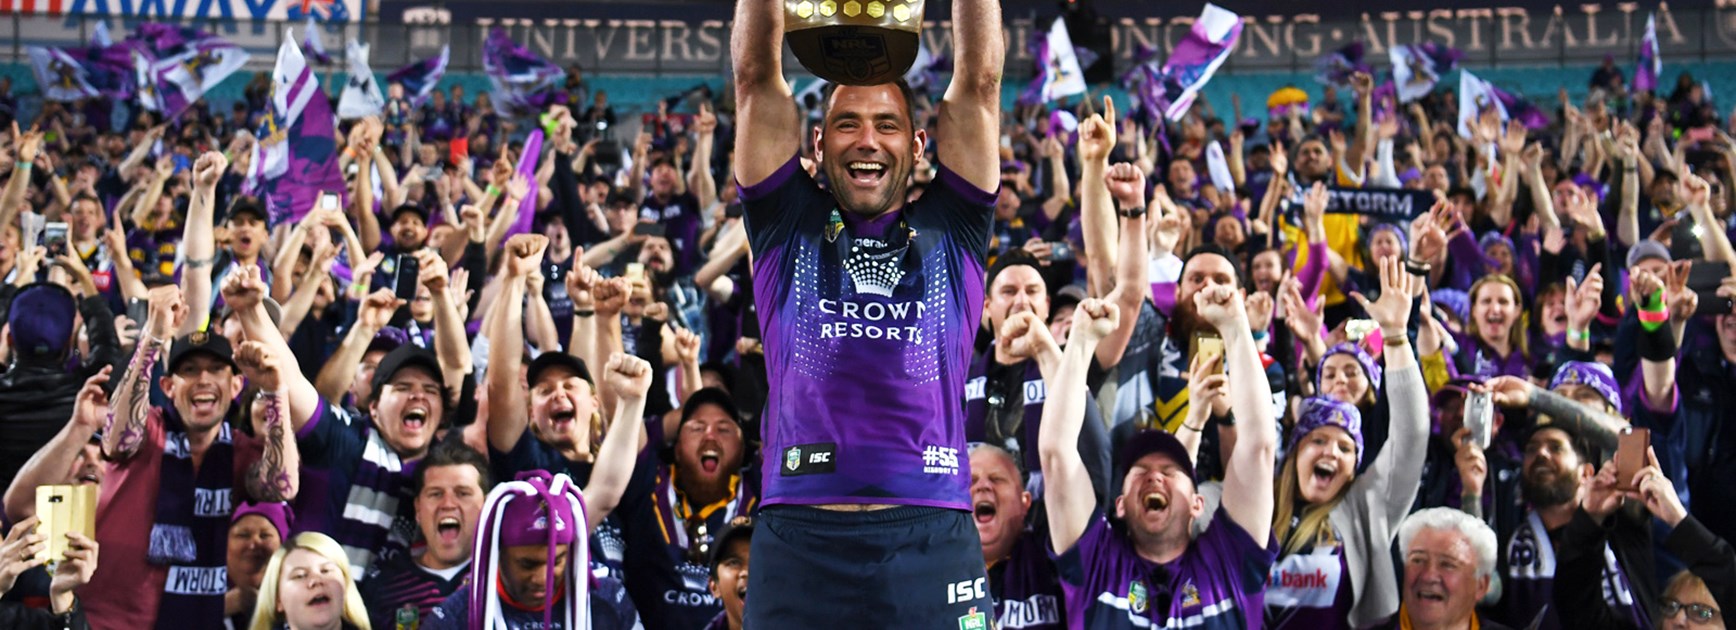 Cameron Smith after Melbourne's NRL Grand Final win.